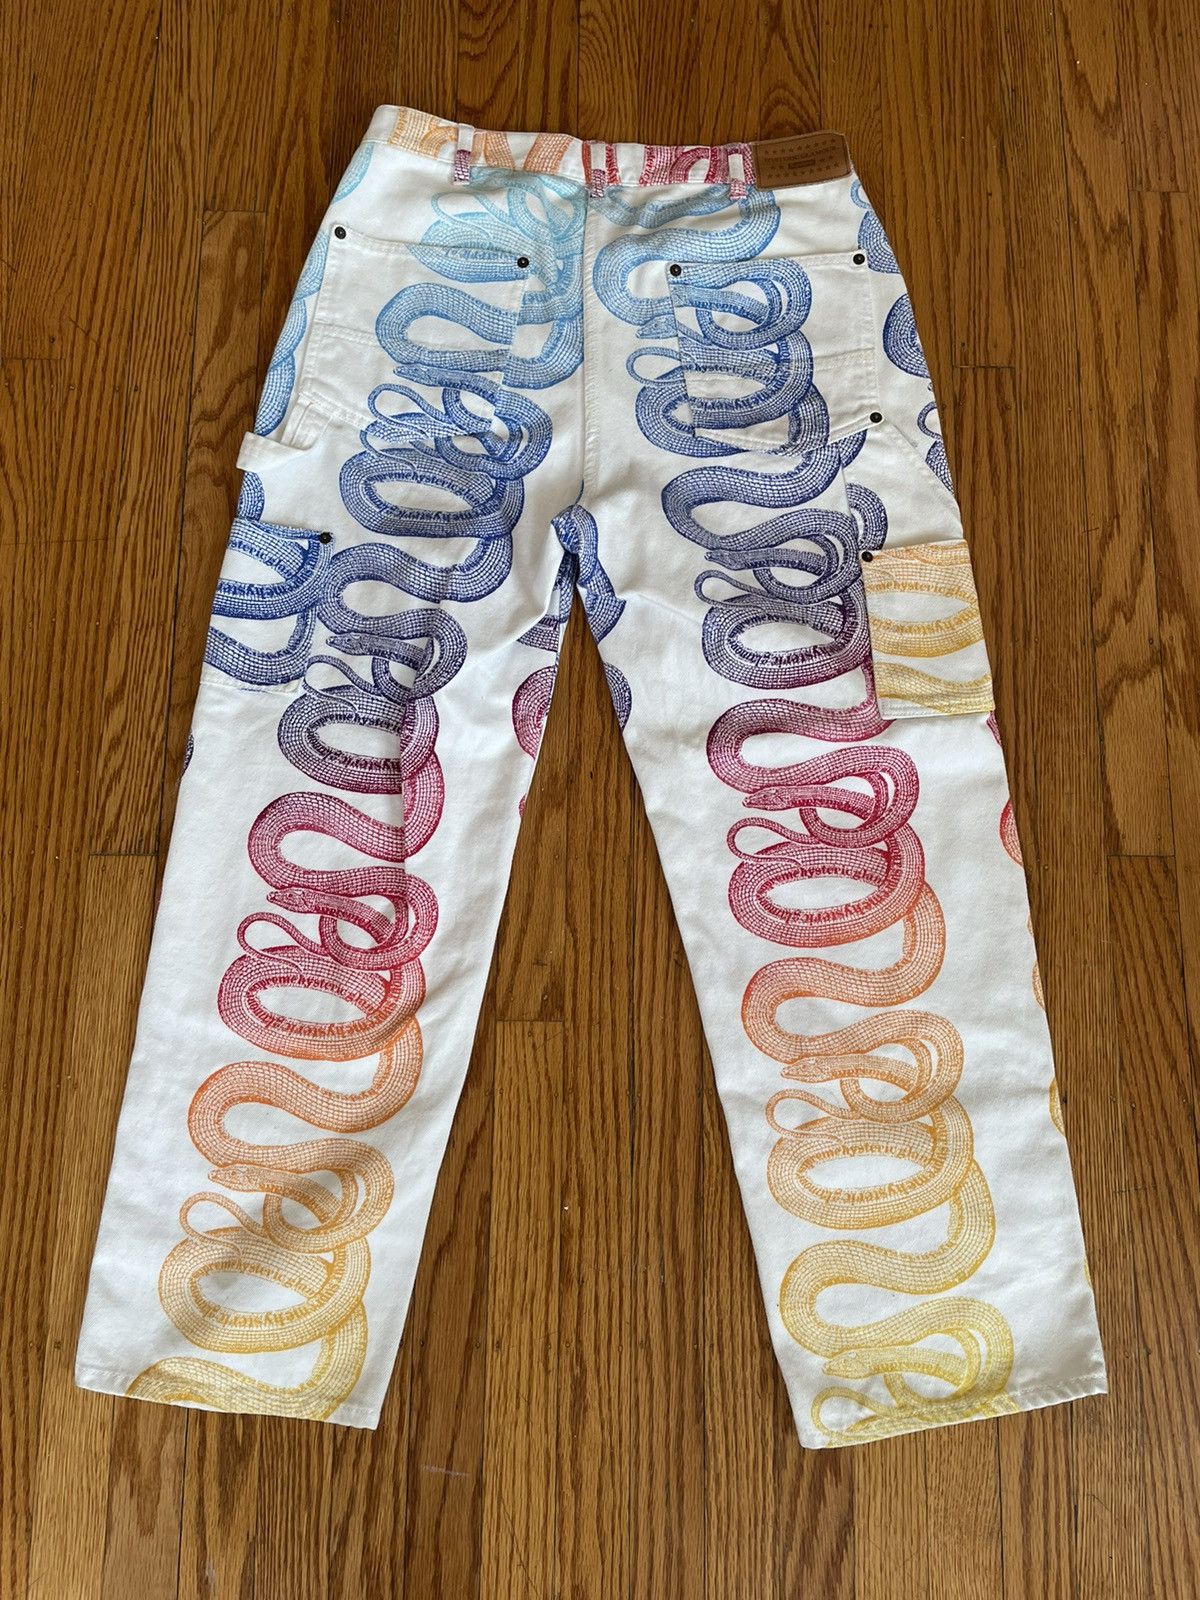 Supreme Supreme hysteric glamour jeans size 30 used | Grailed